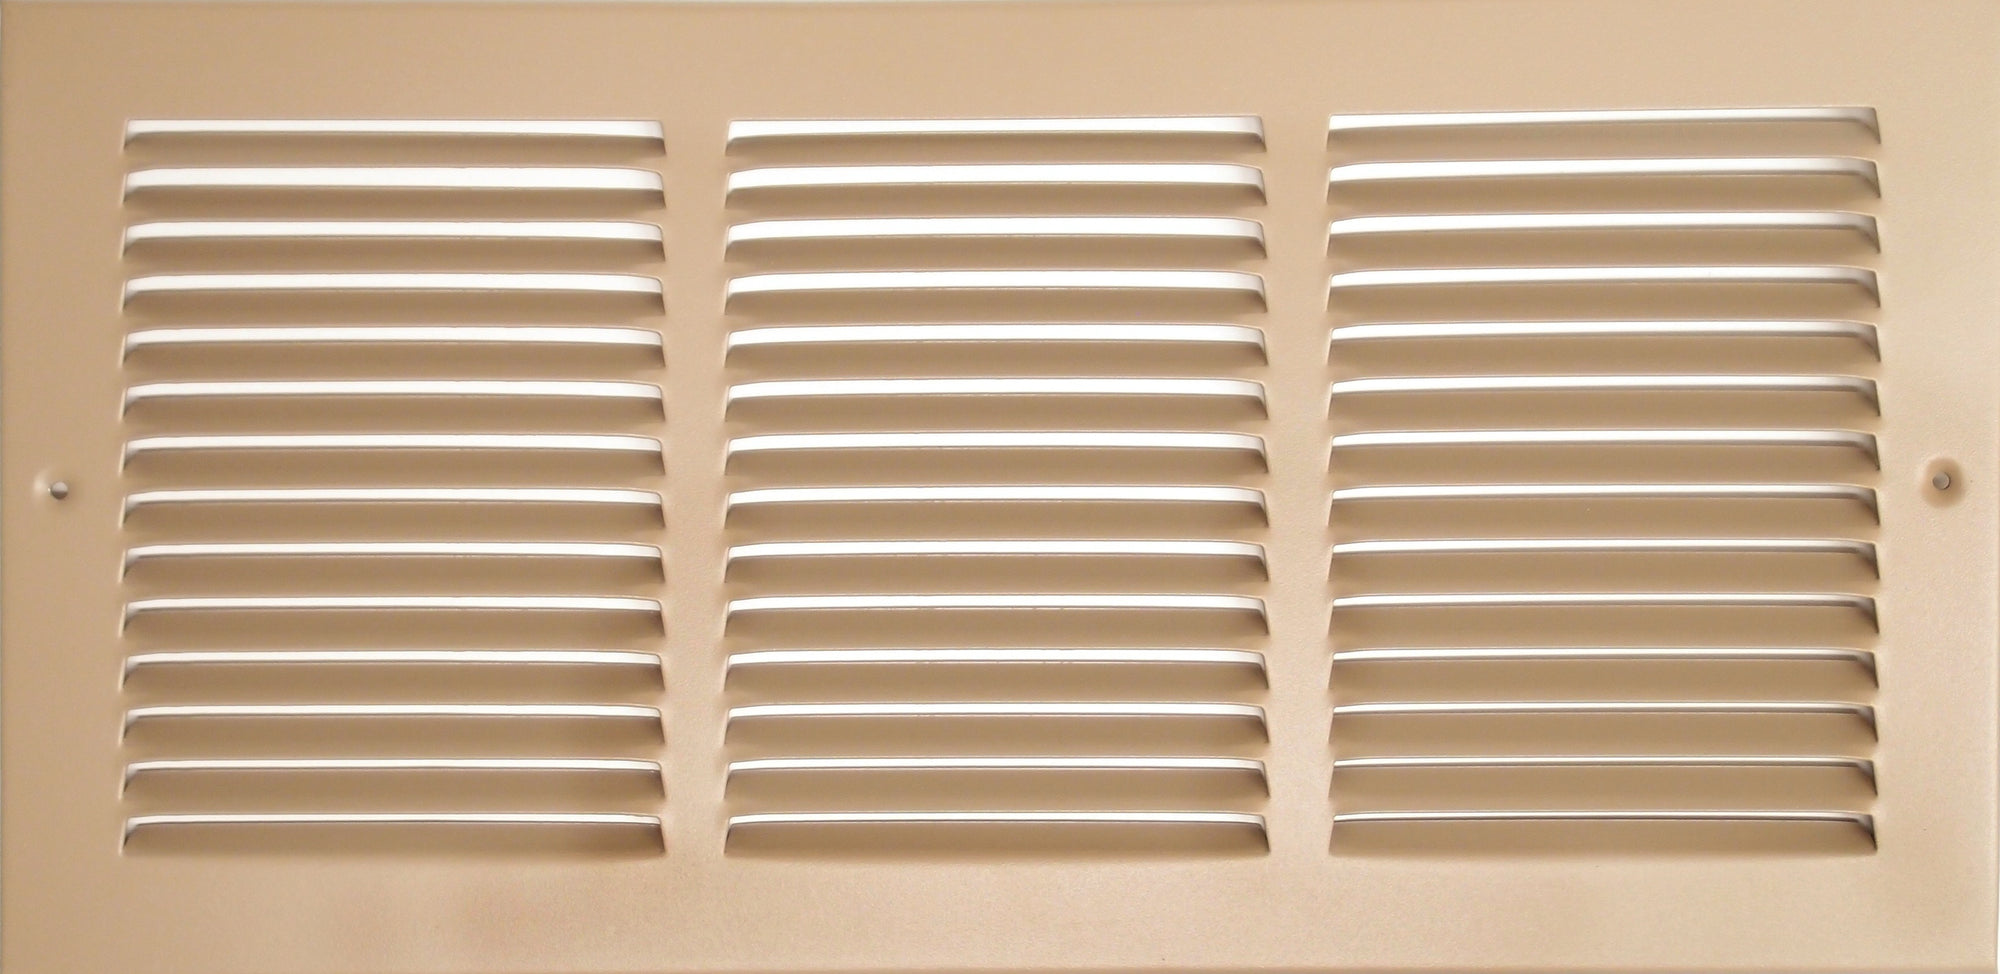 20" X 8" Air Vent Return Grilles - Sidewall and Ceiling - Steel